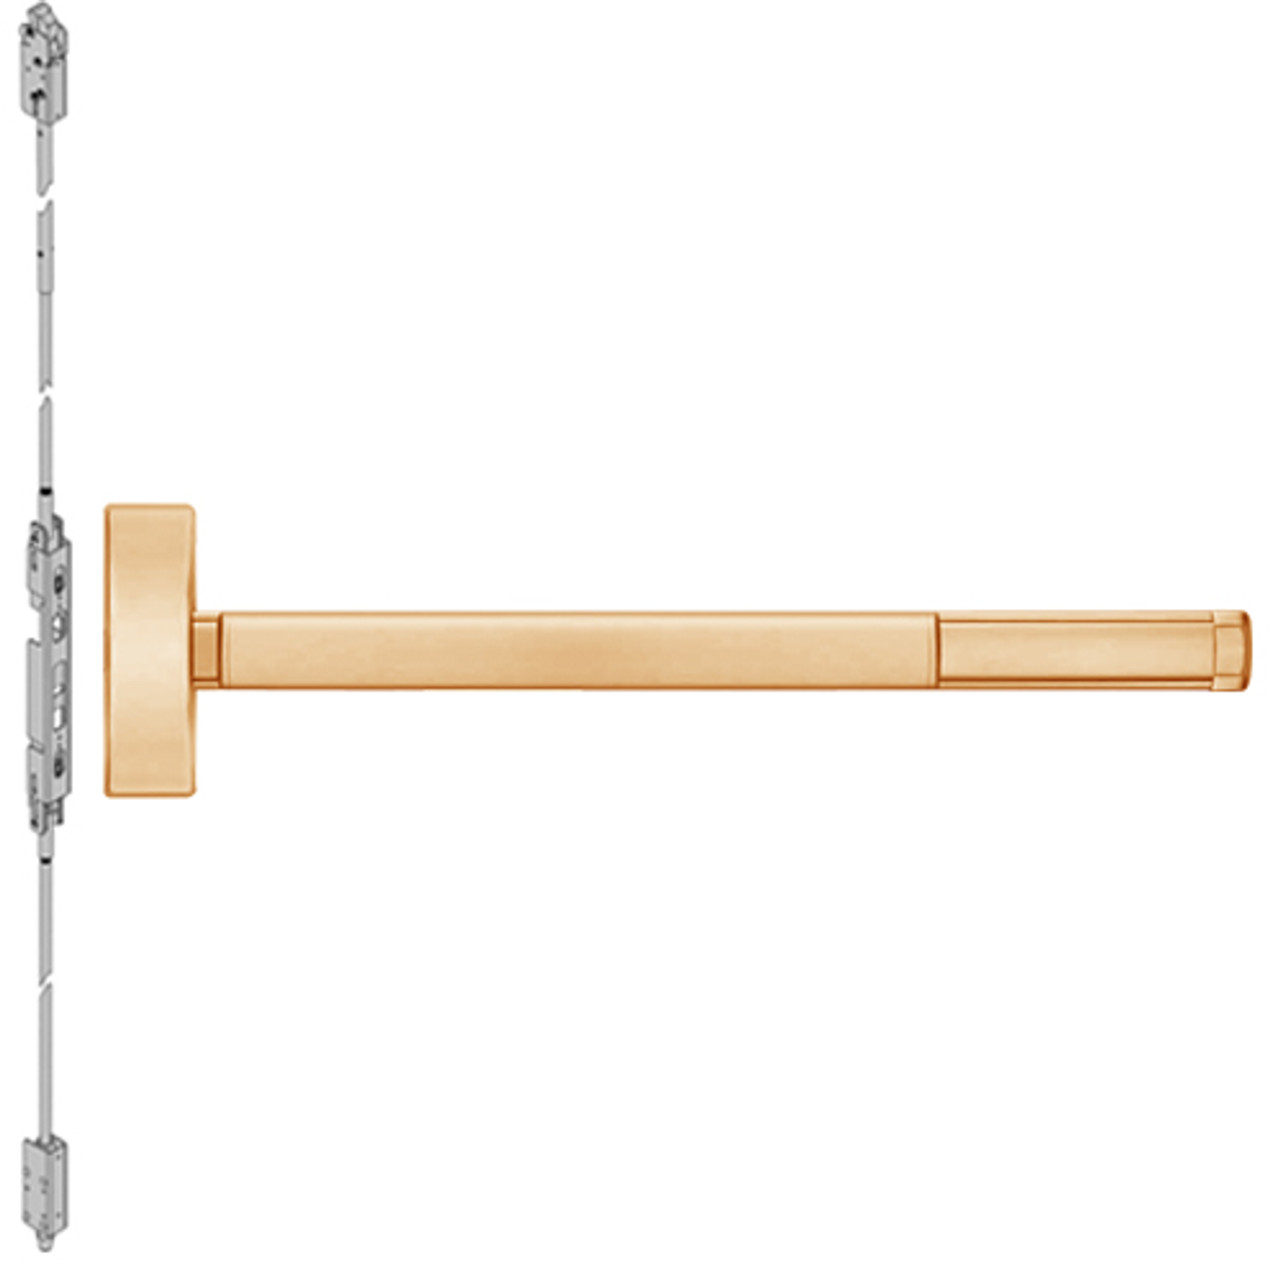 MLRFL2802-612-36 PHI 2800 Series Fire Rated Concealed Vertical Rod Exit Device with Motorized Latch Retraction Prepped for Dummy Trim in Satin Bronze Finish